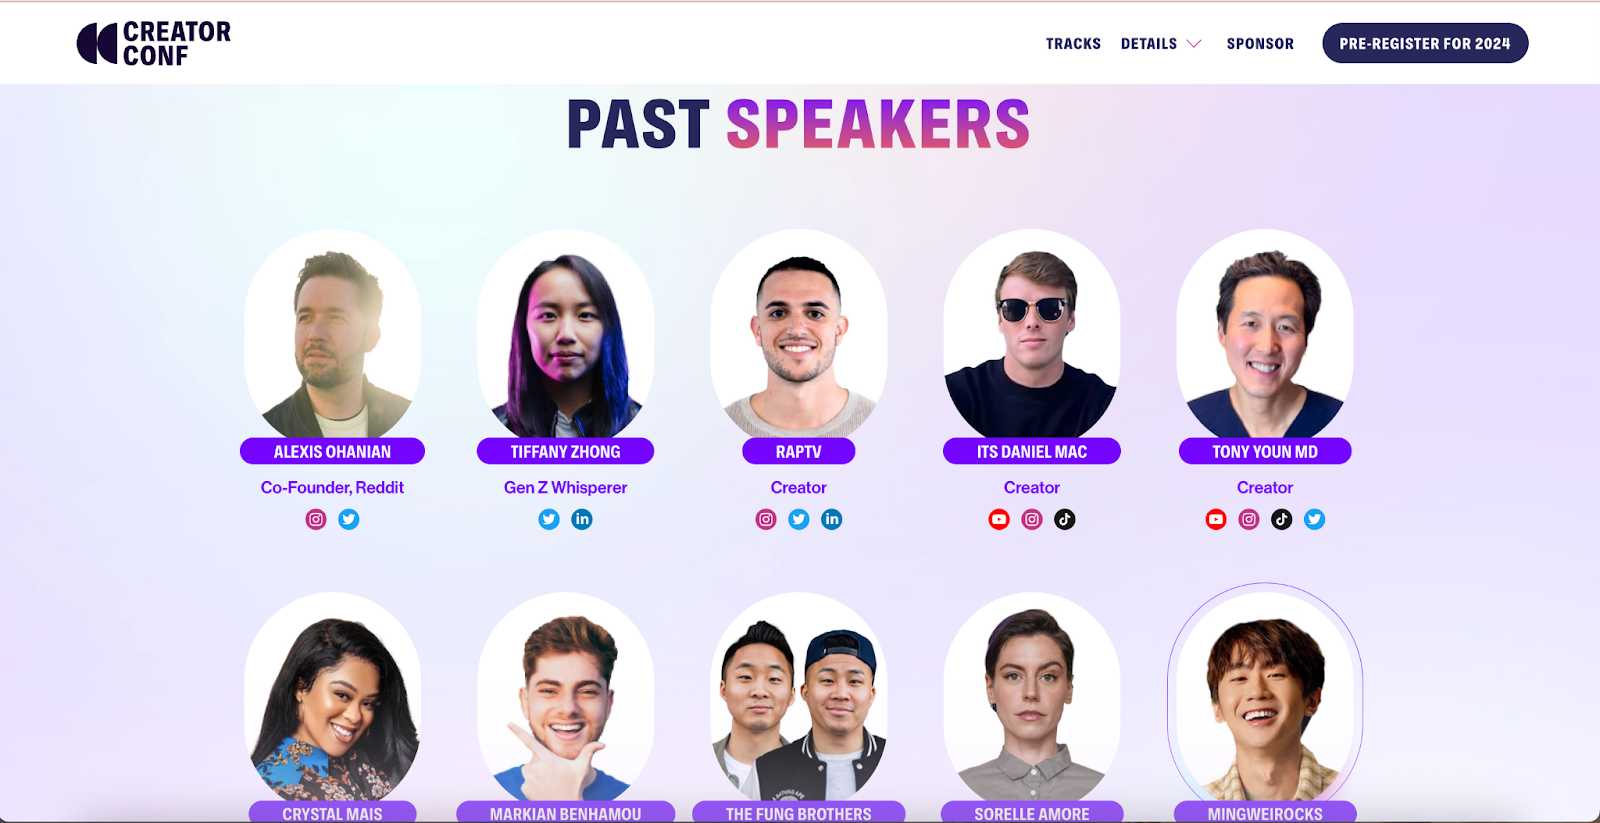 Screenshot of the past speaker section on CreatorConf’s website.